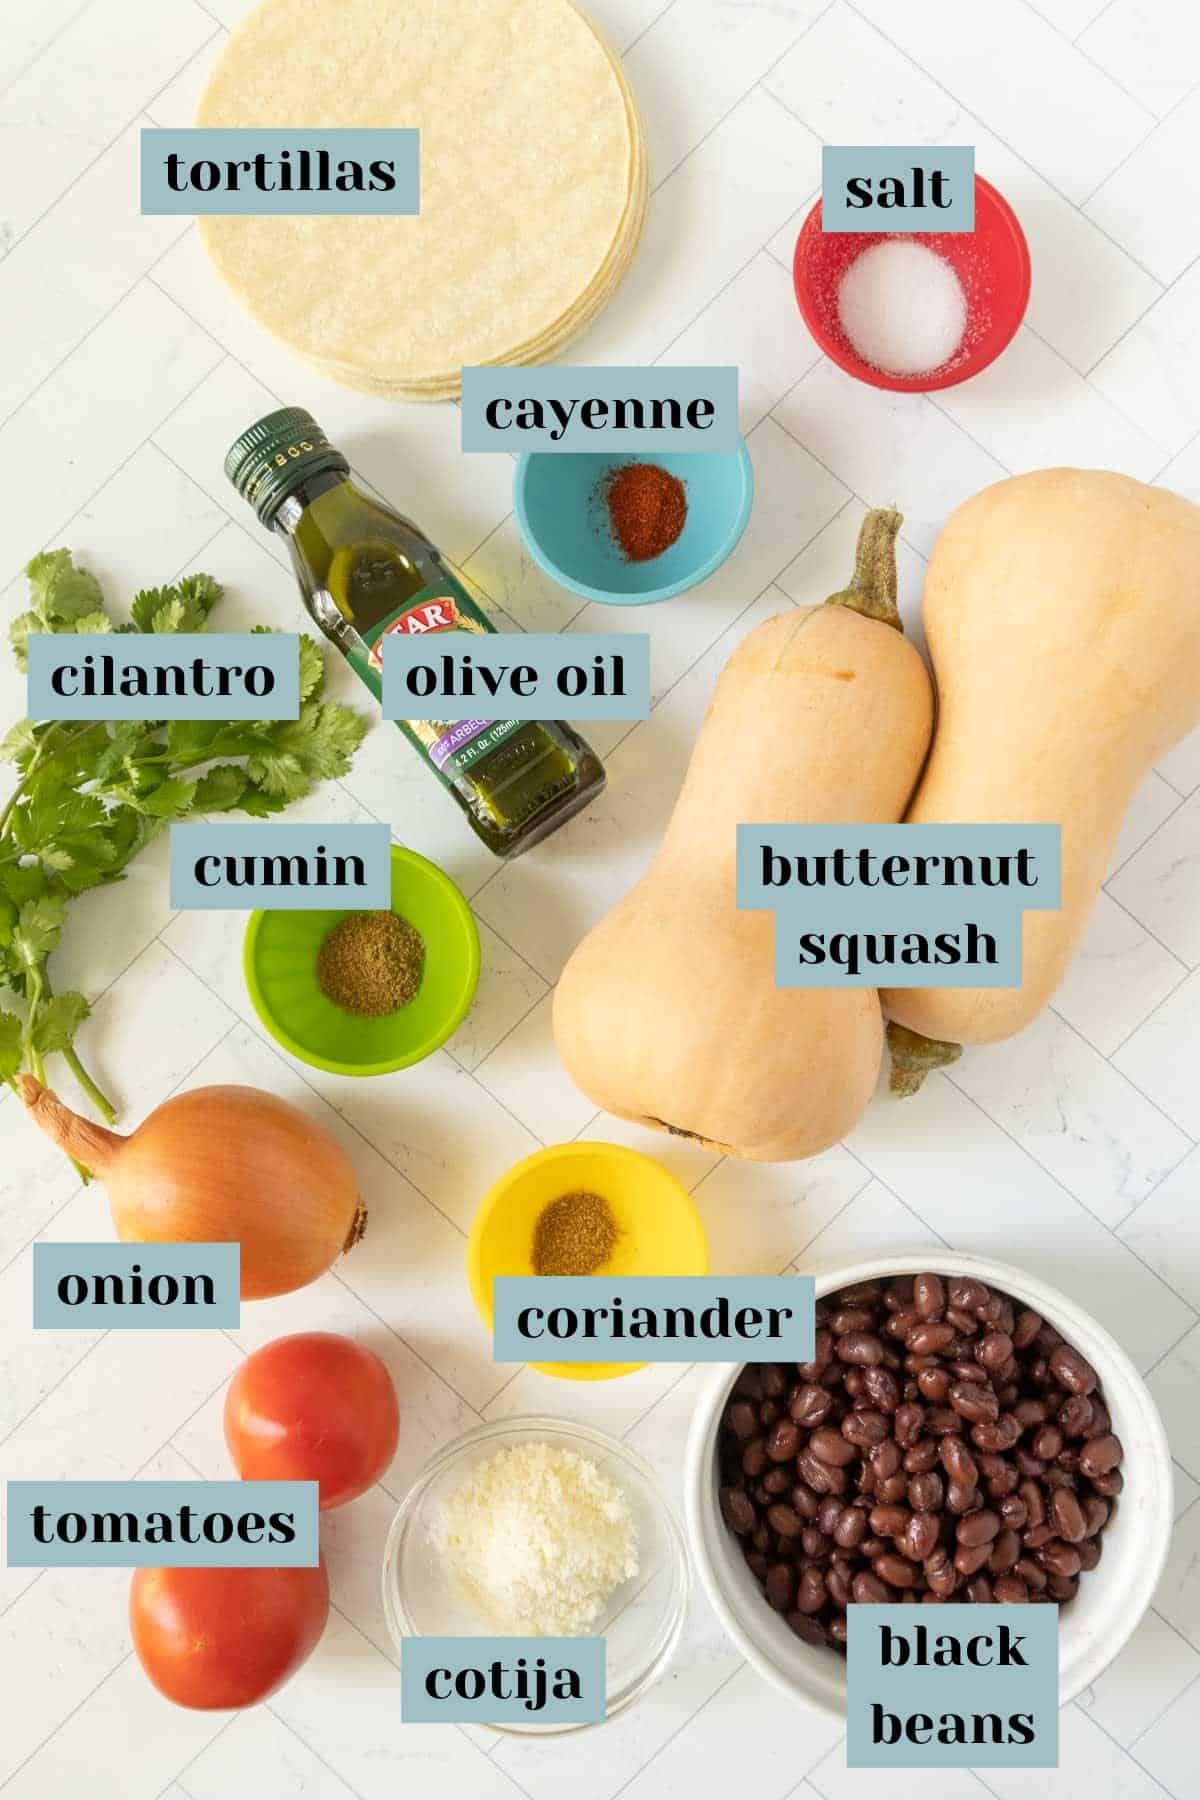 Ingredients for tacos.